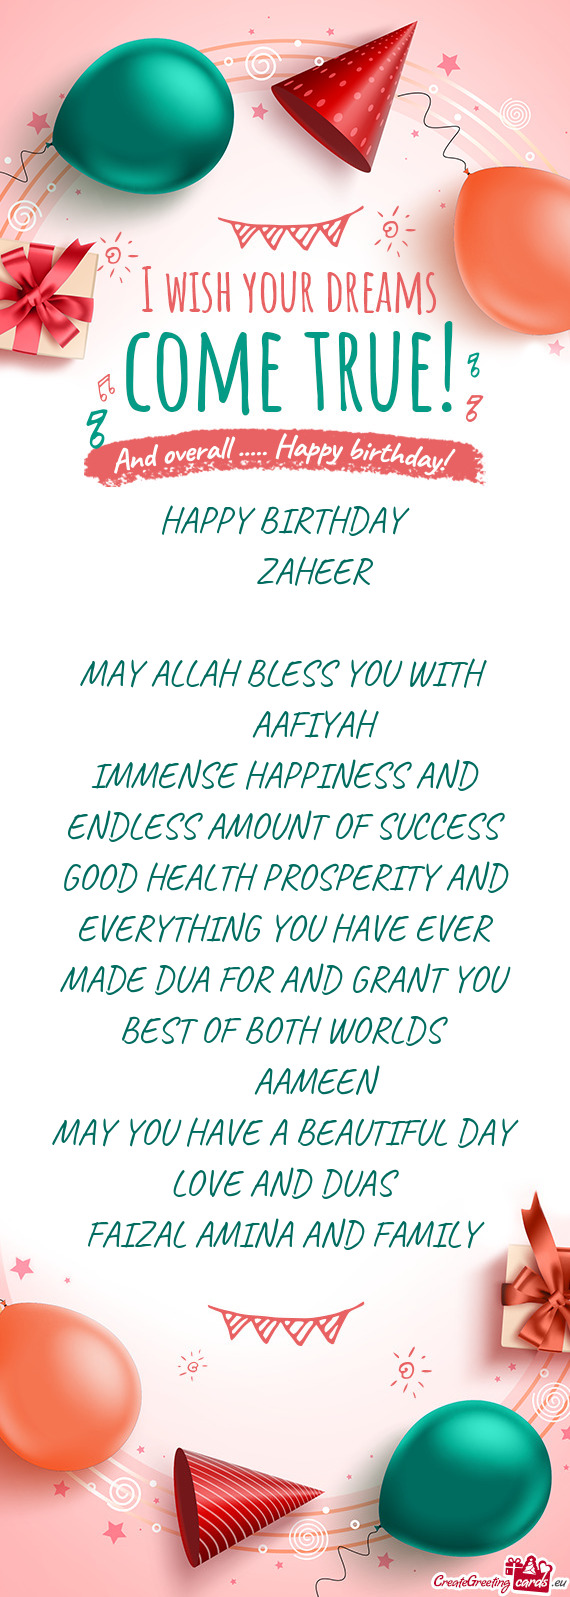 MADE DUA FOR AND GRANT YOU BEST OF BOTH WORLDS